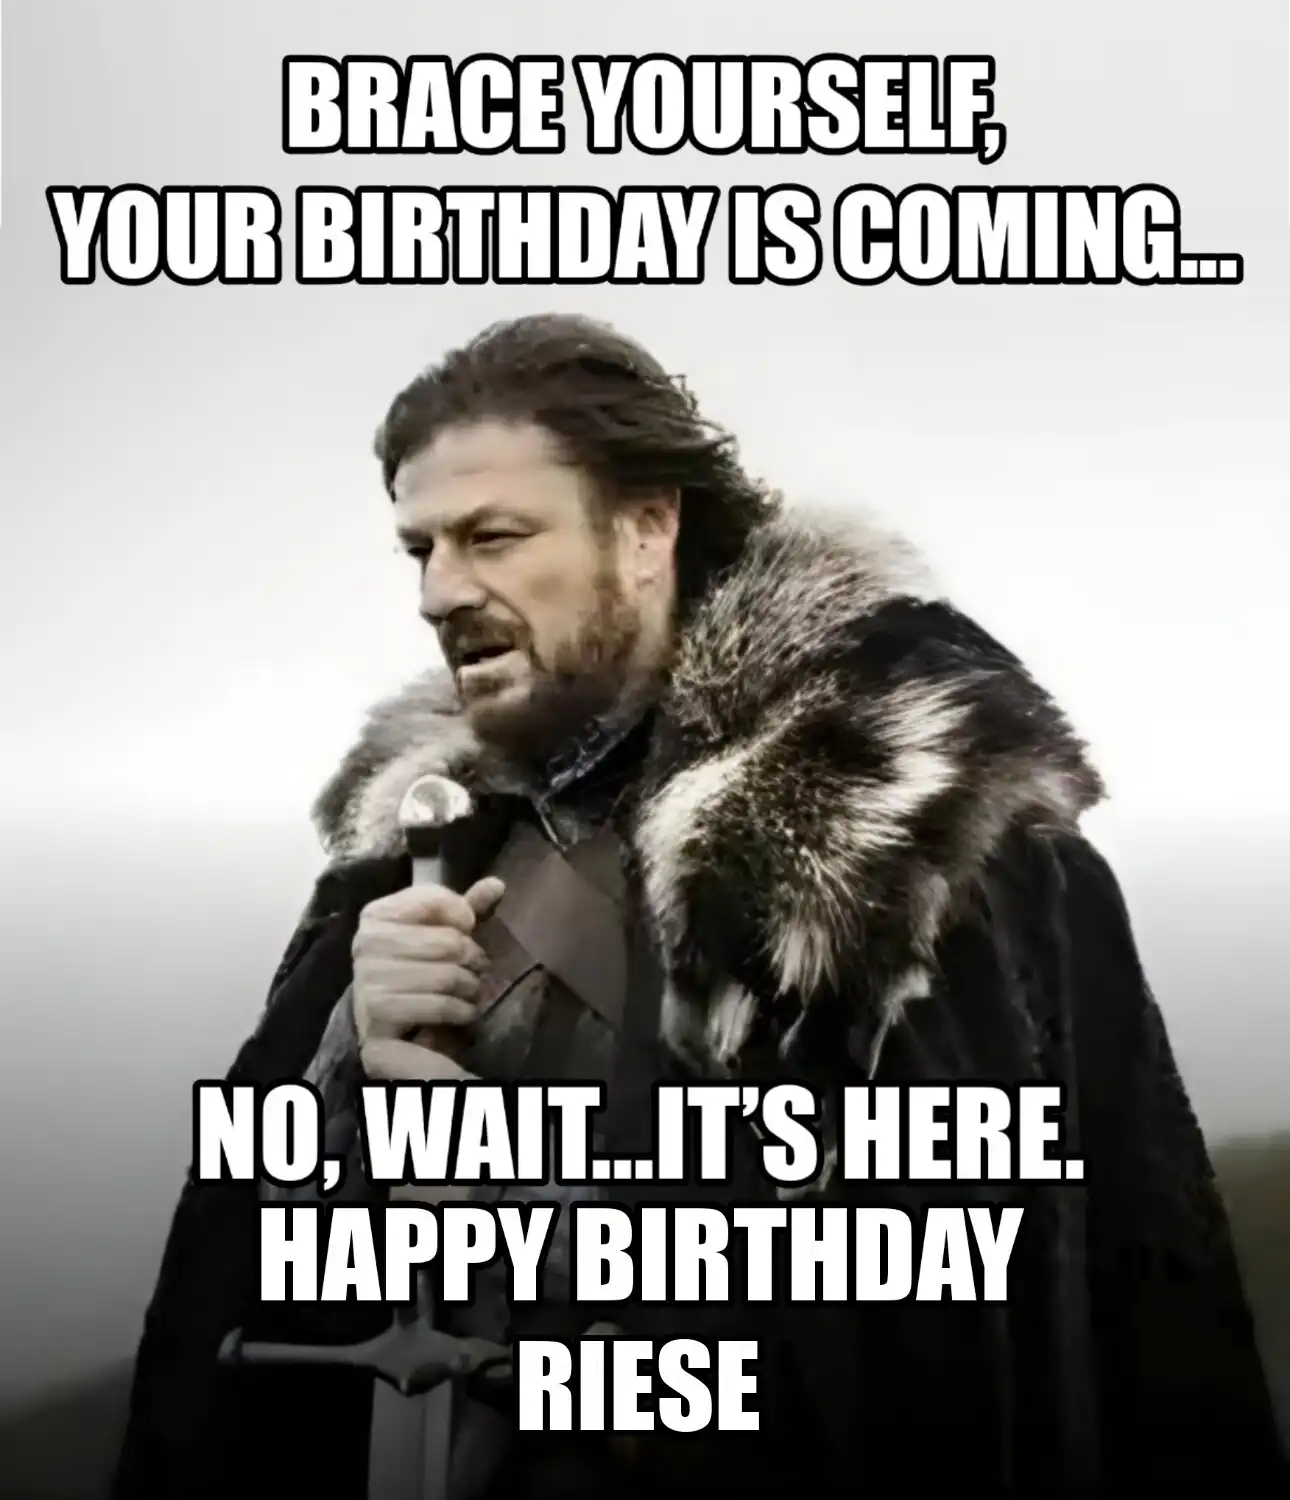 Happy Birthday Riese Brace Yourself Your Birthday Is Coming Meme